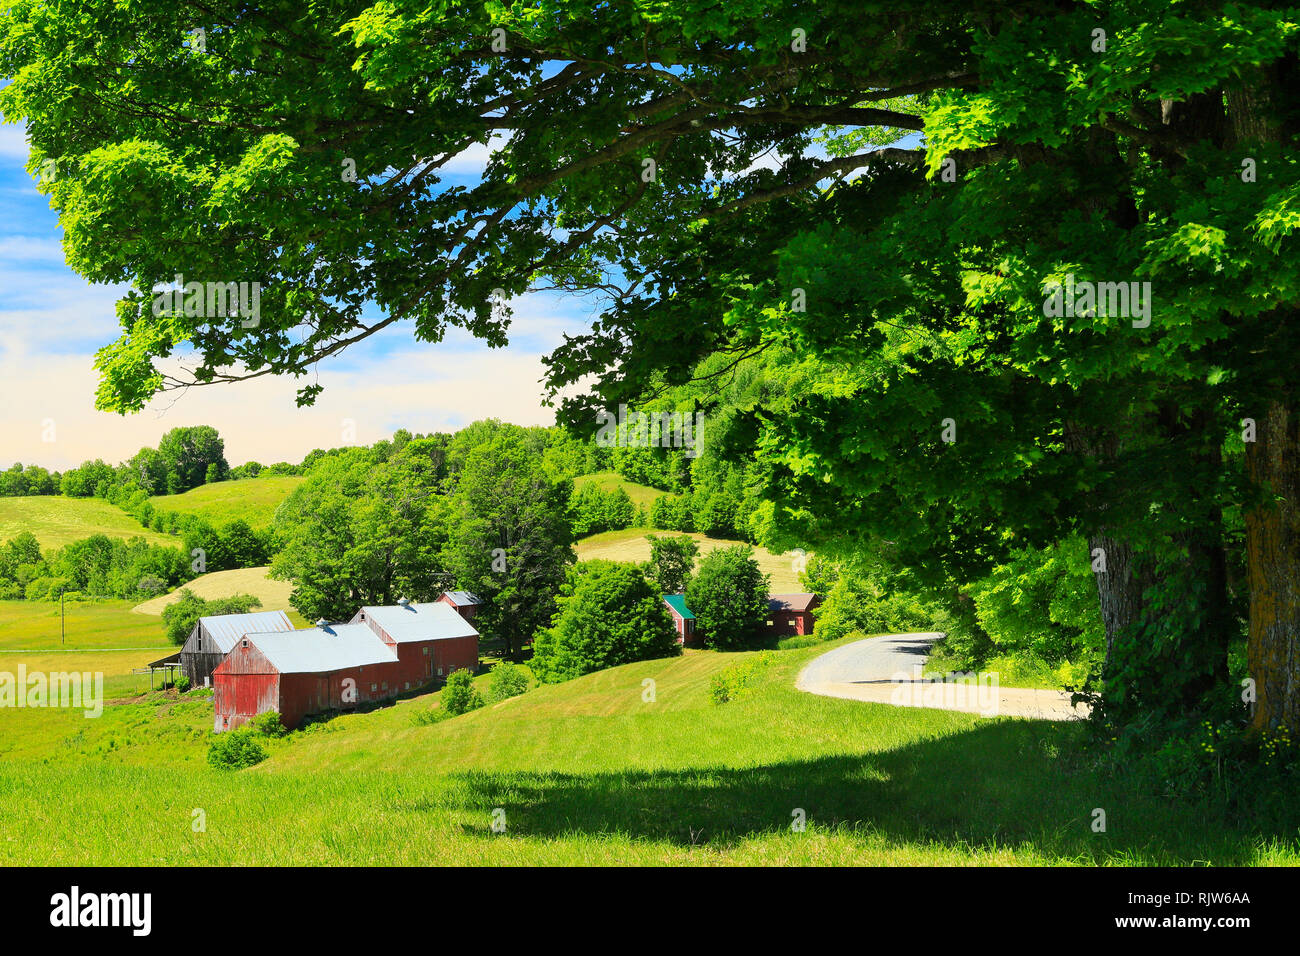 Jenne Farm In Spring, South Woodstock, Vermont, USA Stock Photo